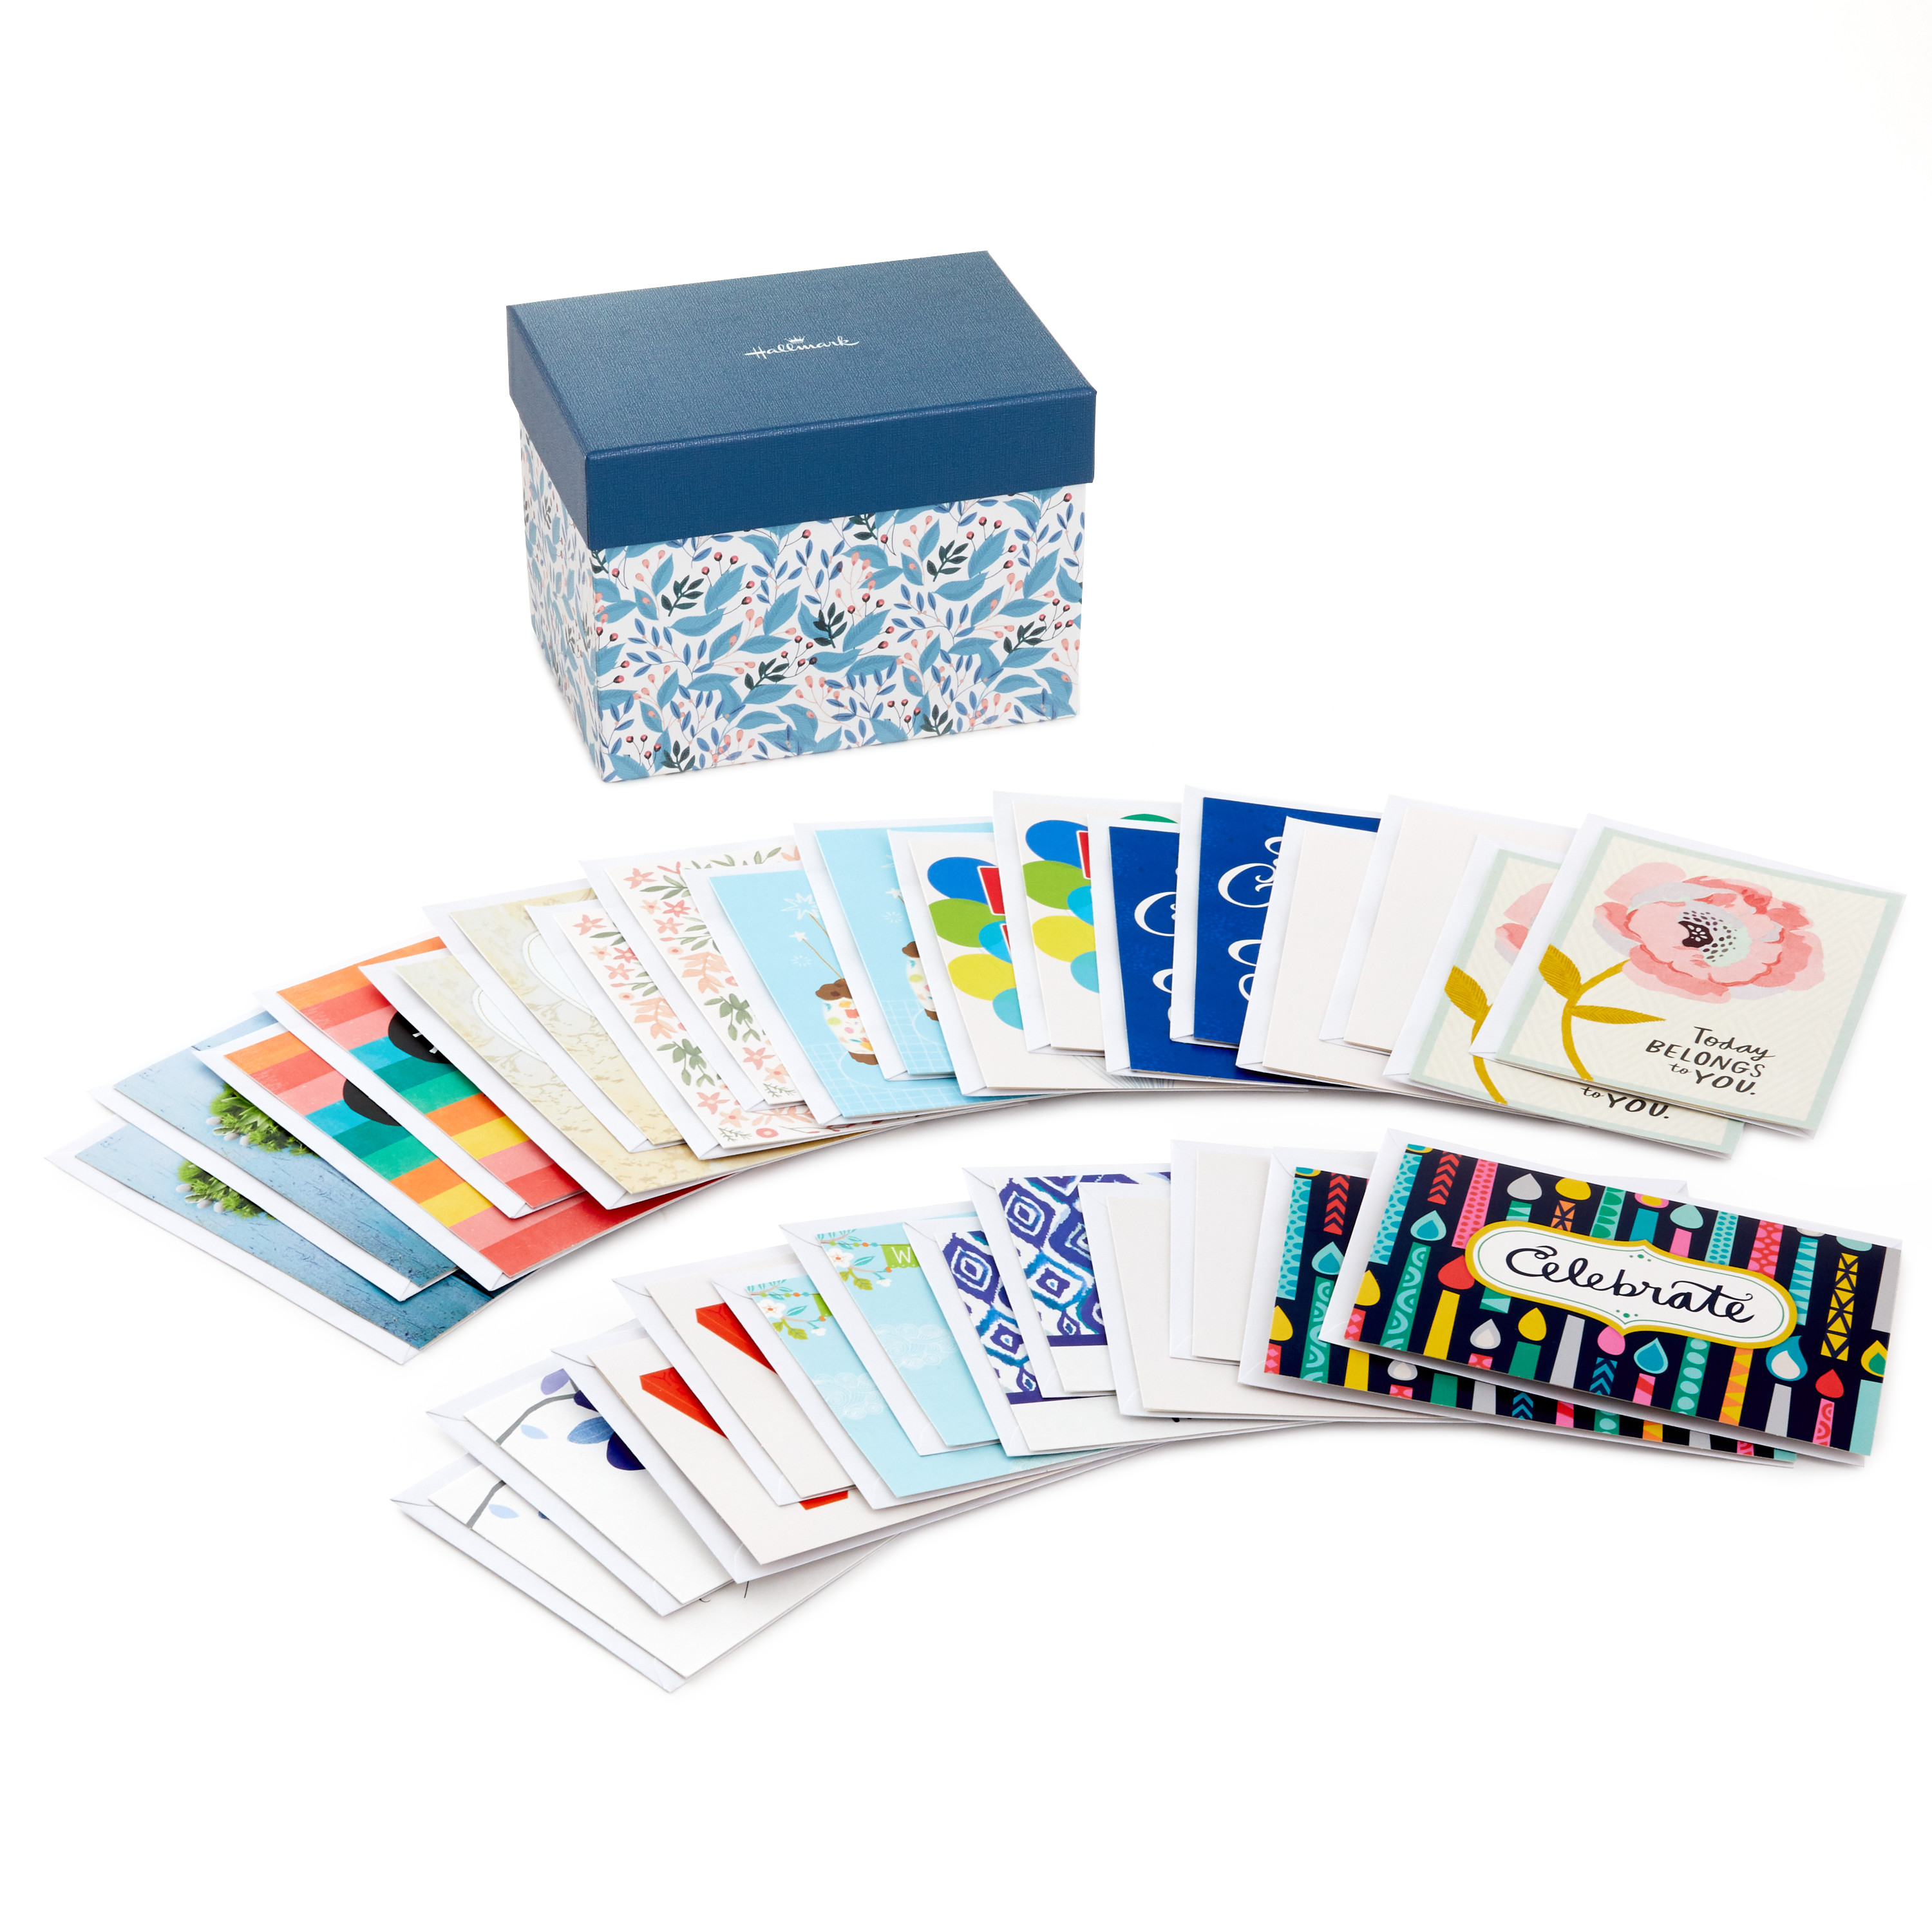 Hallmark All Occasion Greeting Cards Assortment—30 Cards and Envelopes with Card Organizer Box (Blue Leaves)—Birthday Cards, Baby Shower Cards, Sympathy Cards, Wedding Cards, Thank You Cards - image 1 of 5